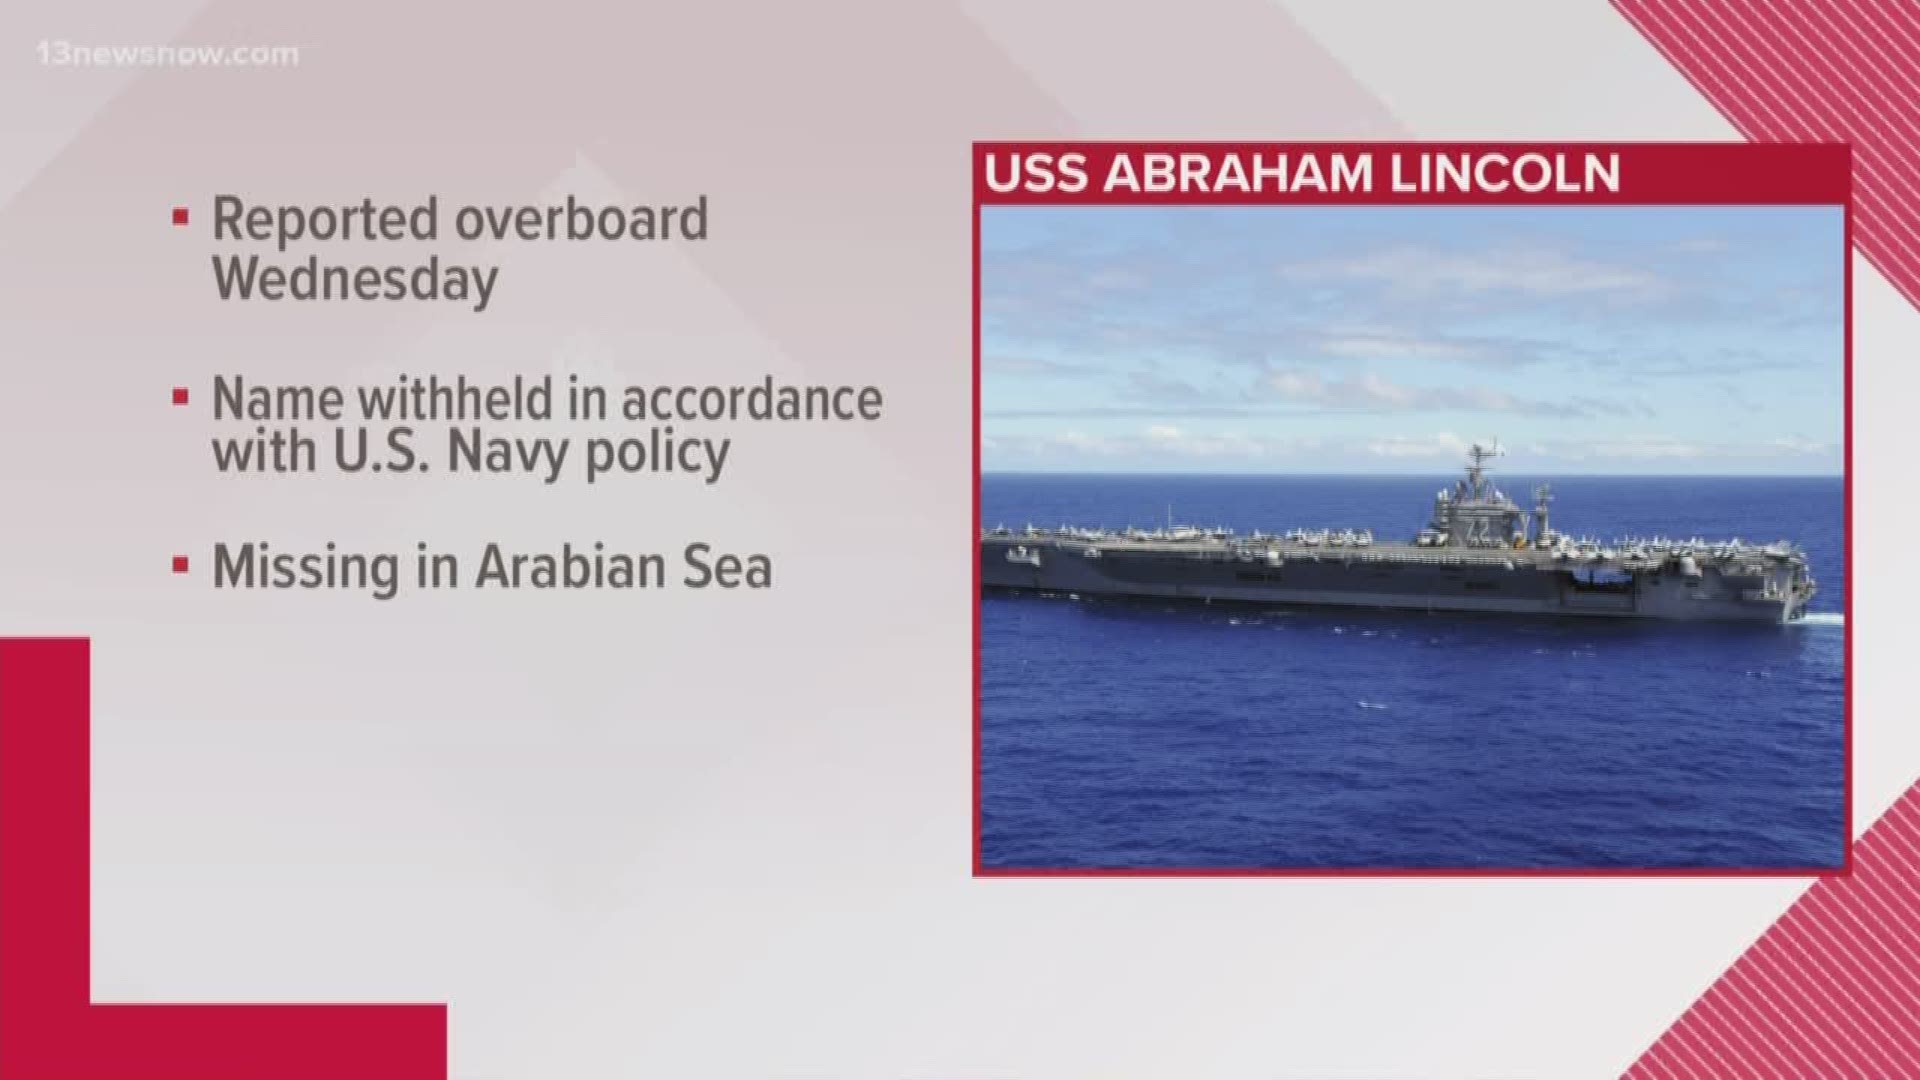 The U.S. Navy said a search-and-rescue mission is underway after a sailor went overboard the aircraft carrier USS Abraham Lincoln in the Arabian Sea.